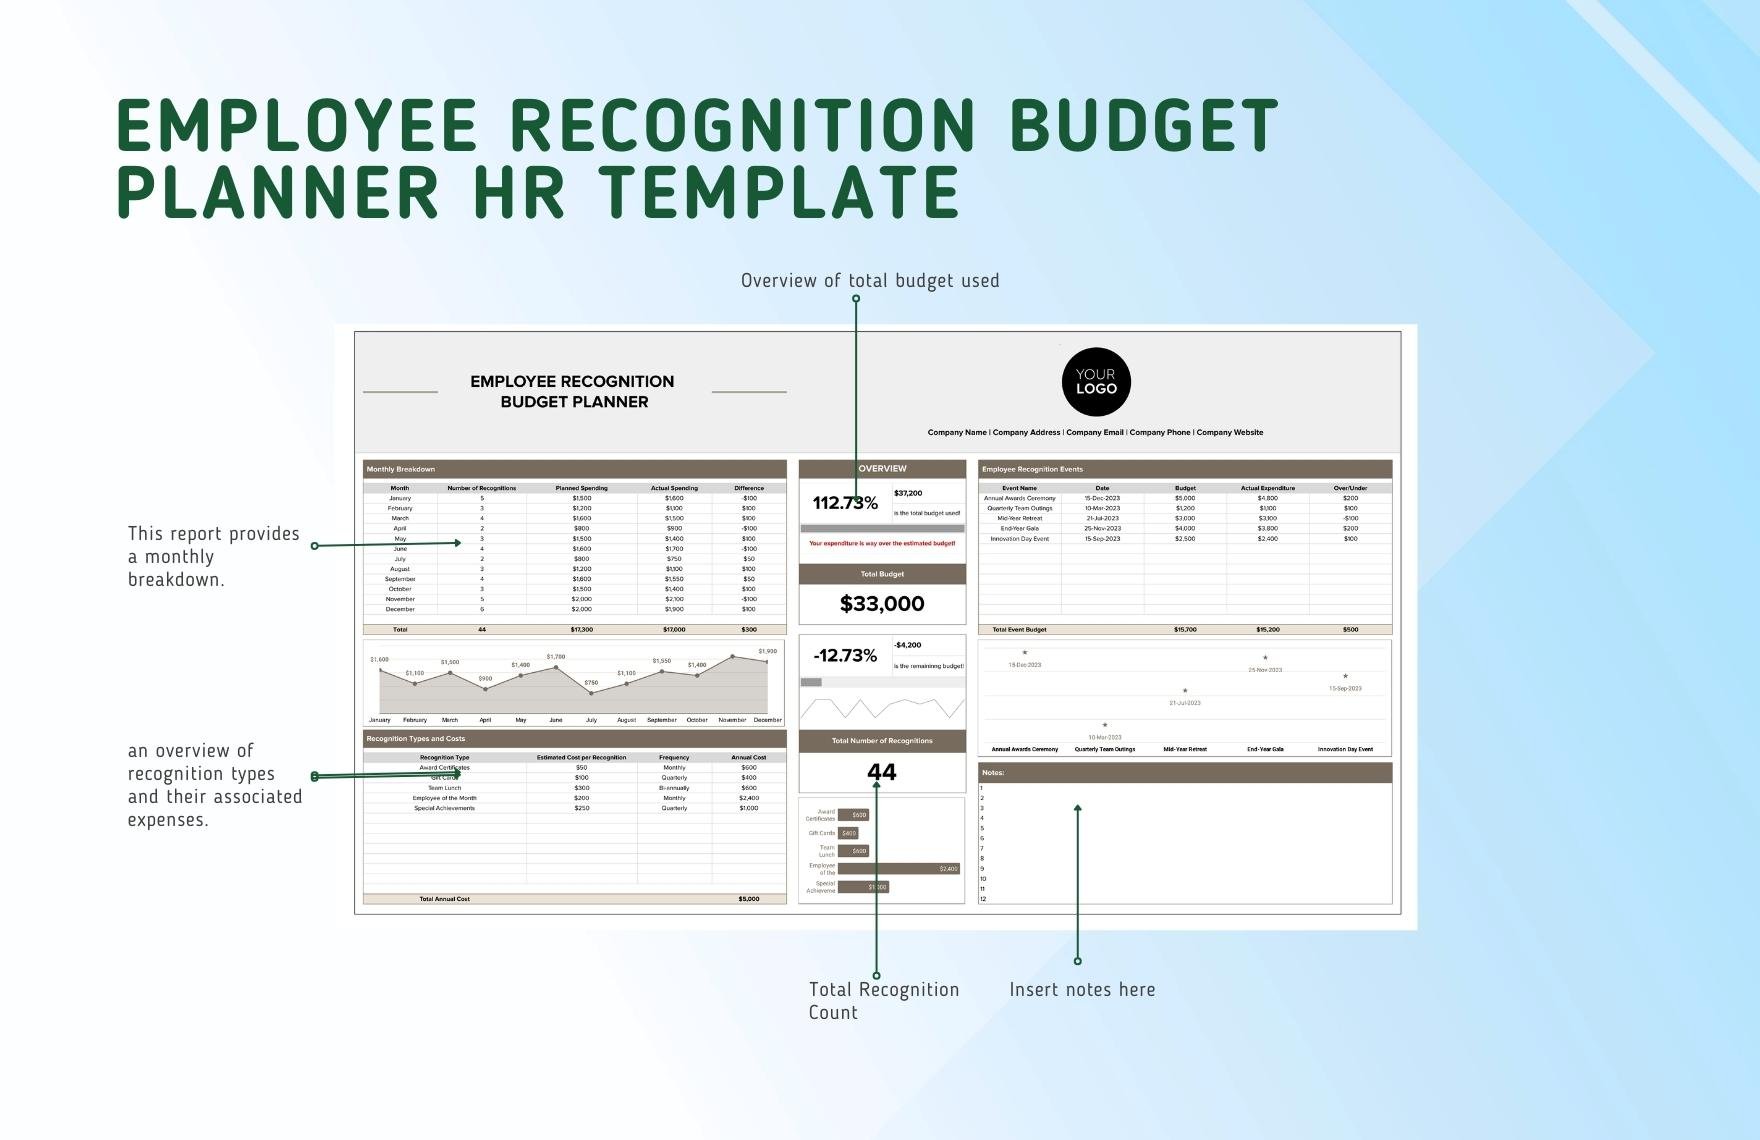 Employee Recognition Budget Planner HR Template